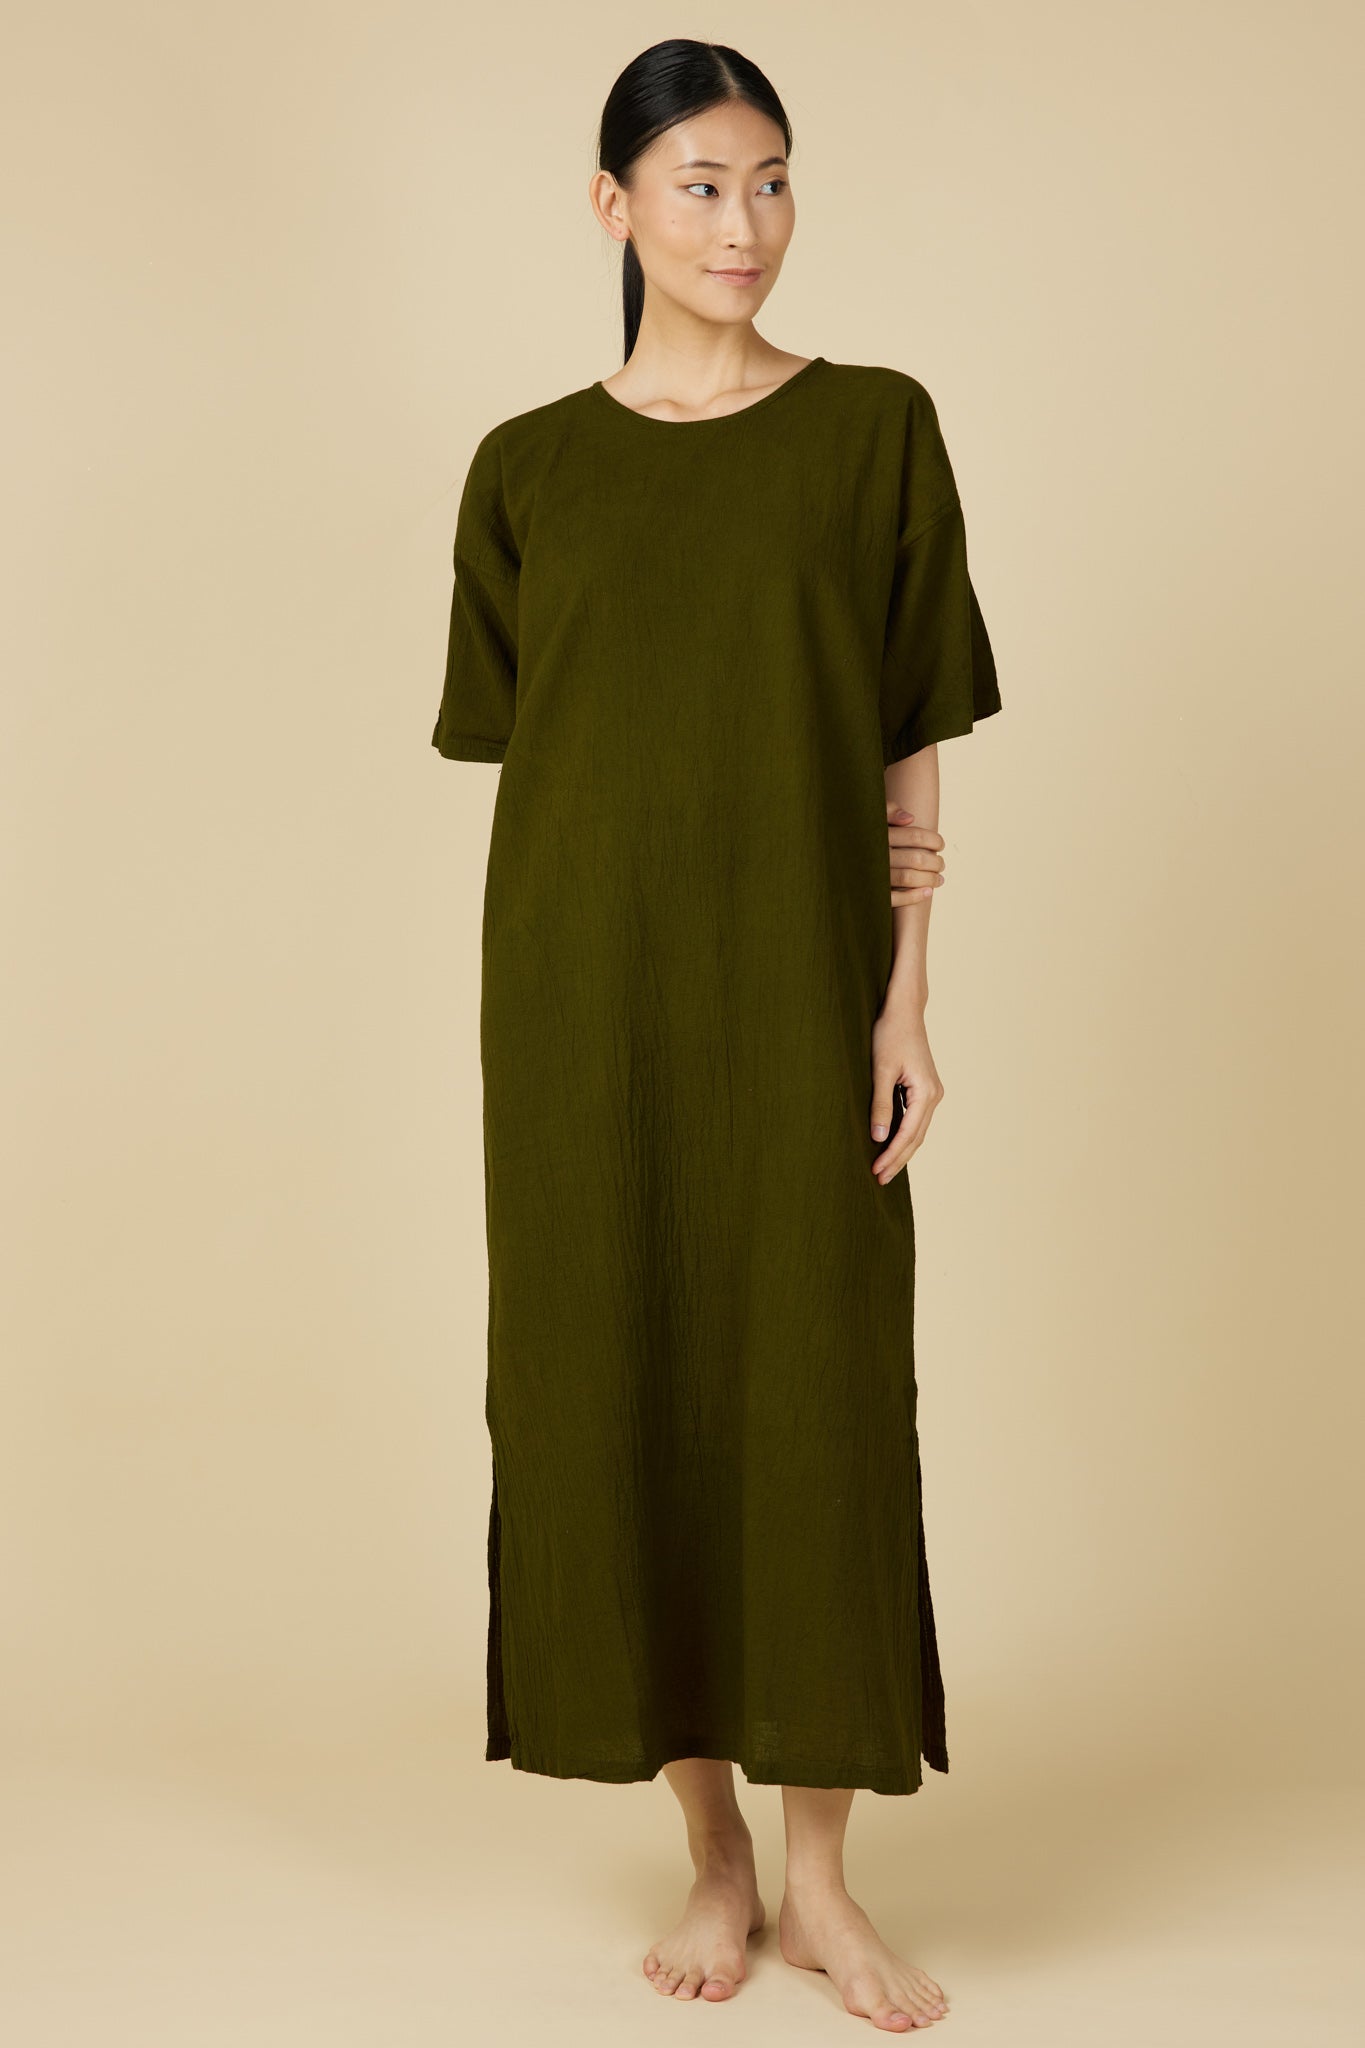 Hand Dyed Short Sleeve Dress in Army Green